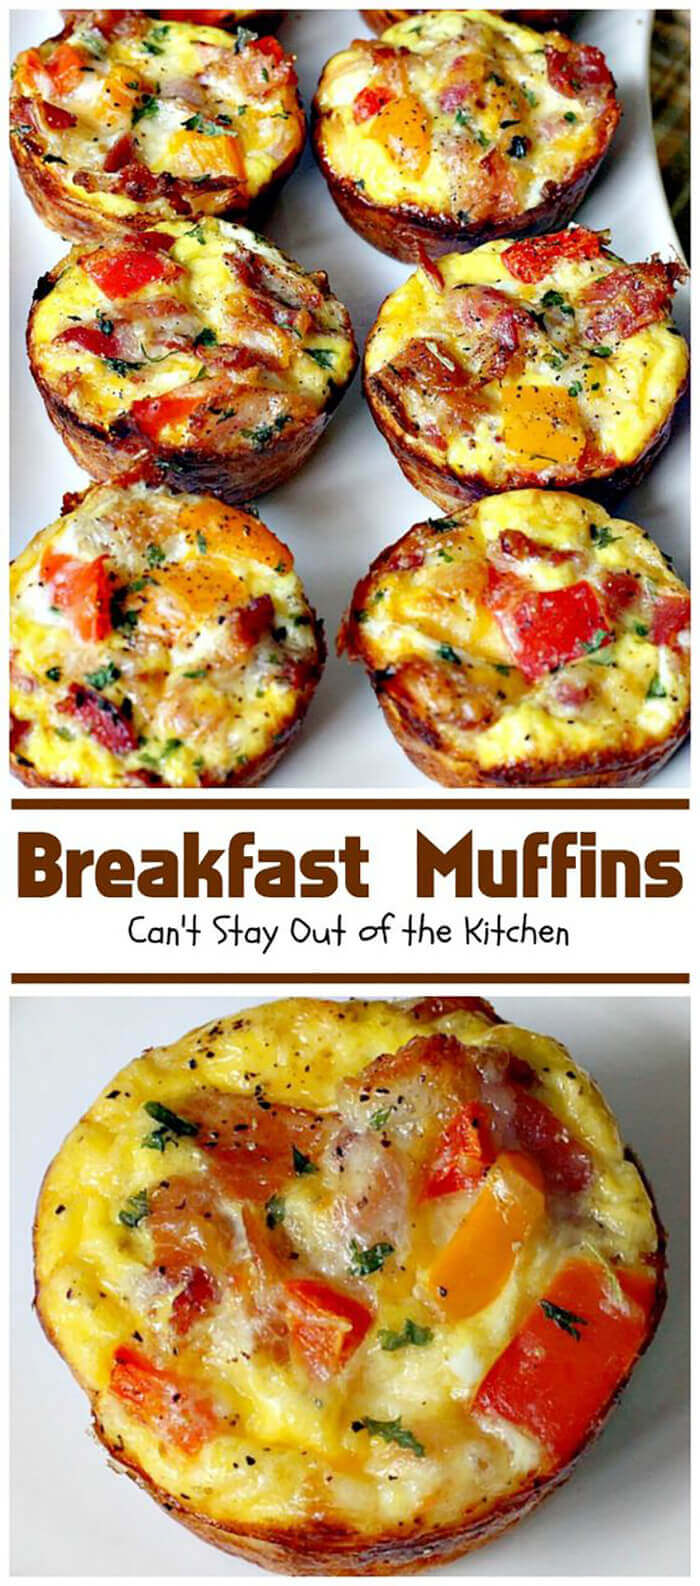 50 Fast and Simple Gluten-Free Muffin Recipes that will Become Your All-Time Favorites